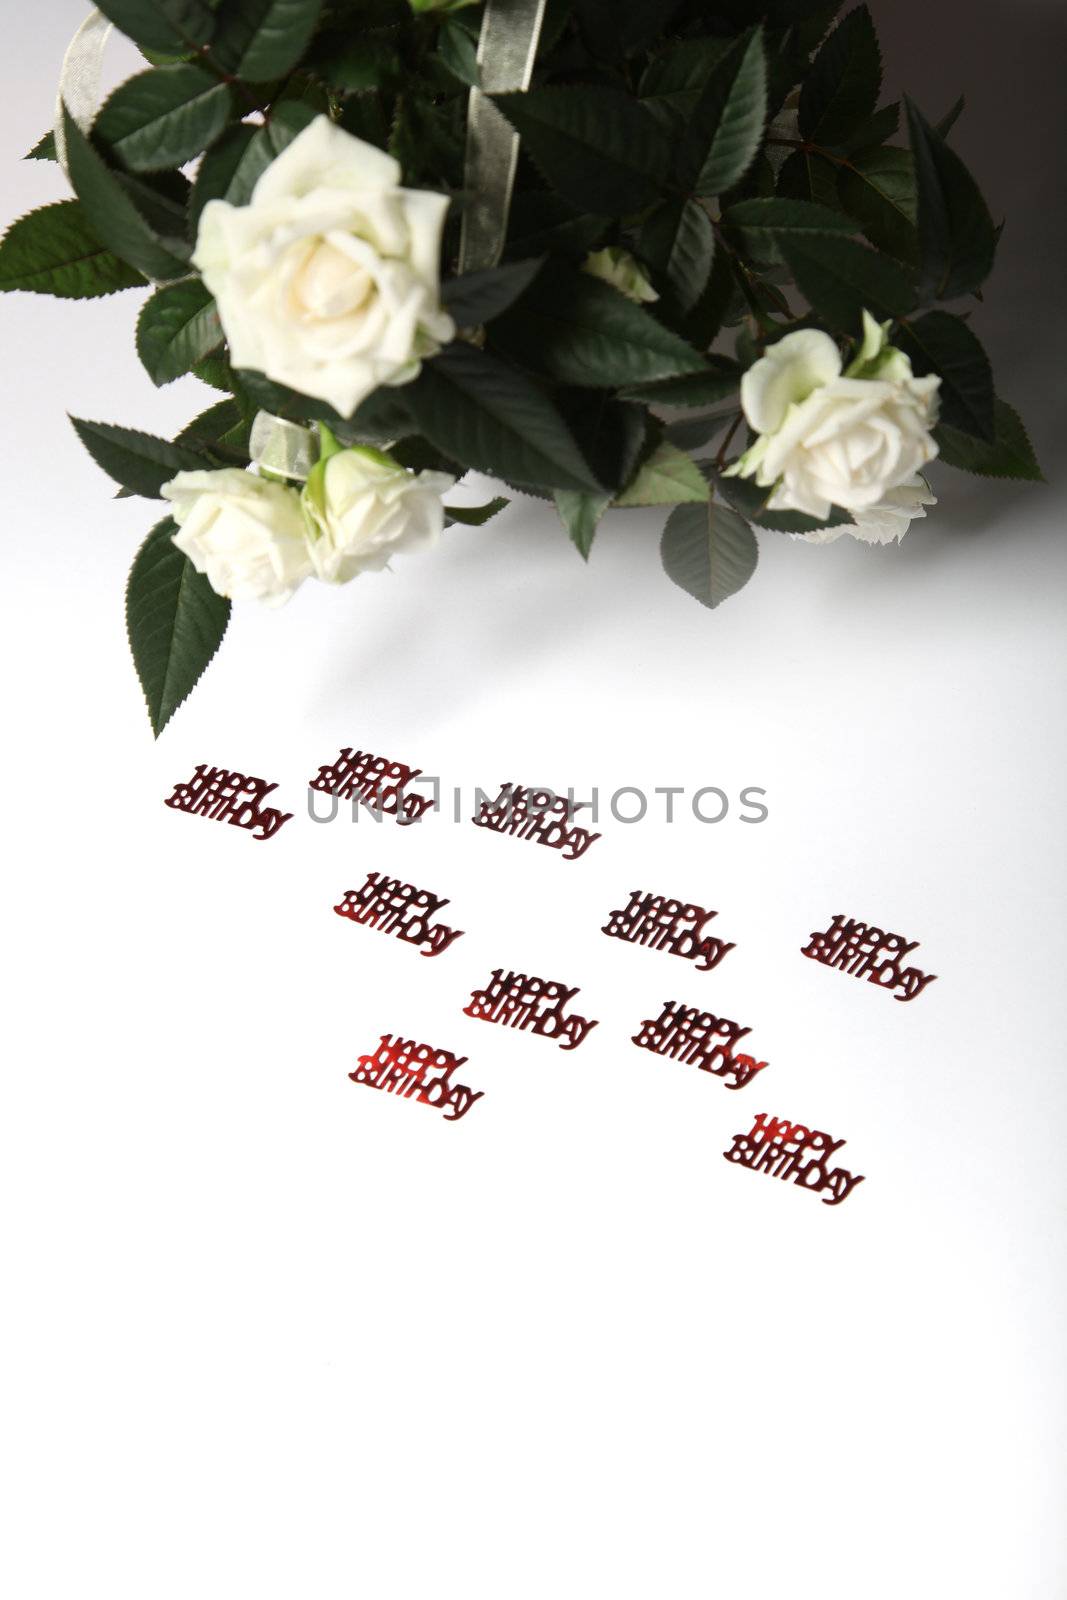 Lettering with happy birthday and white roses in the background, text space, vertical format